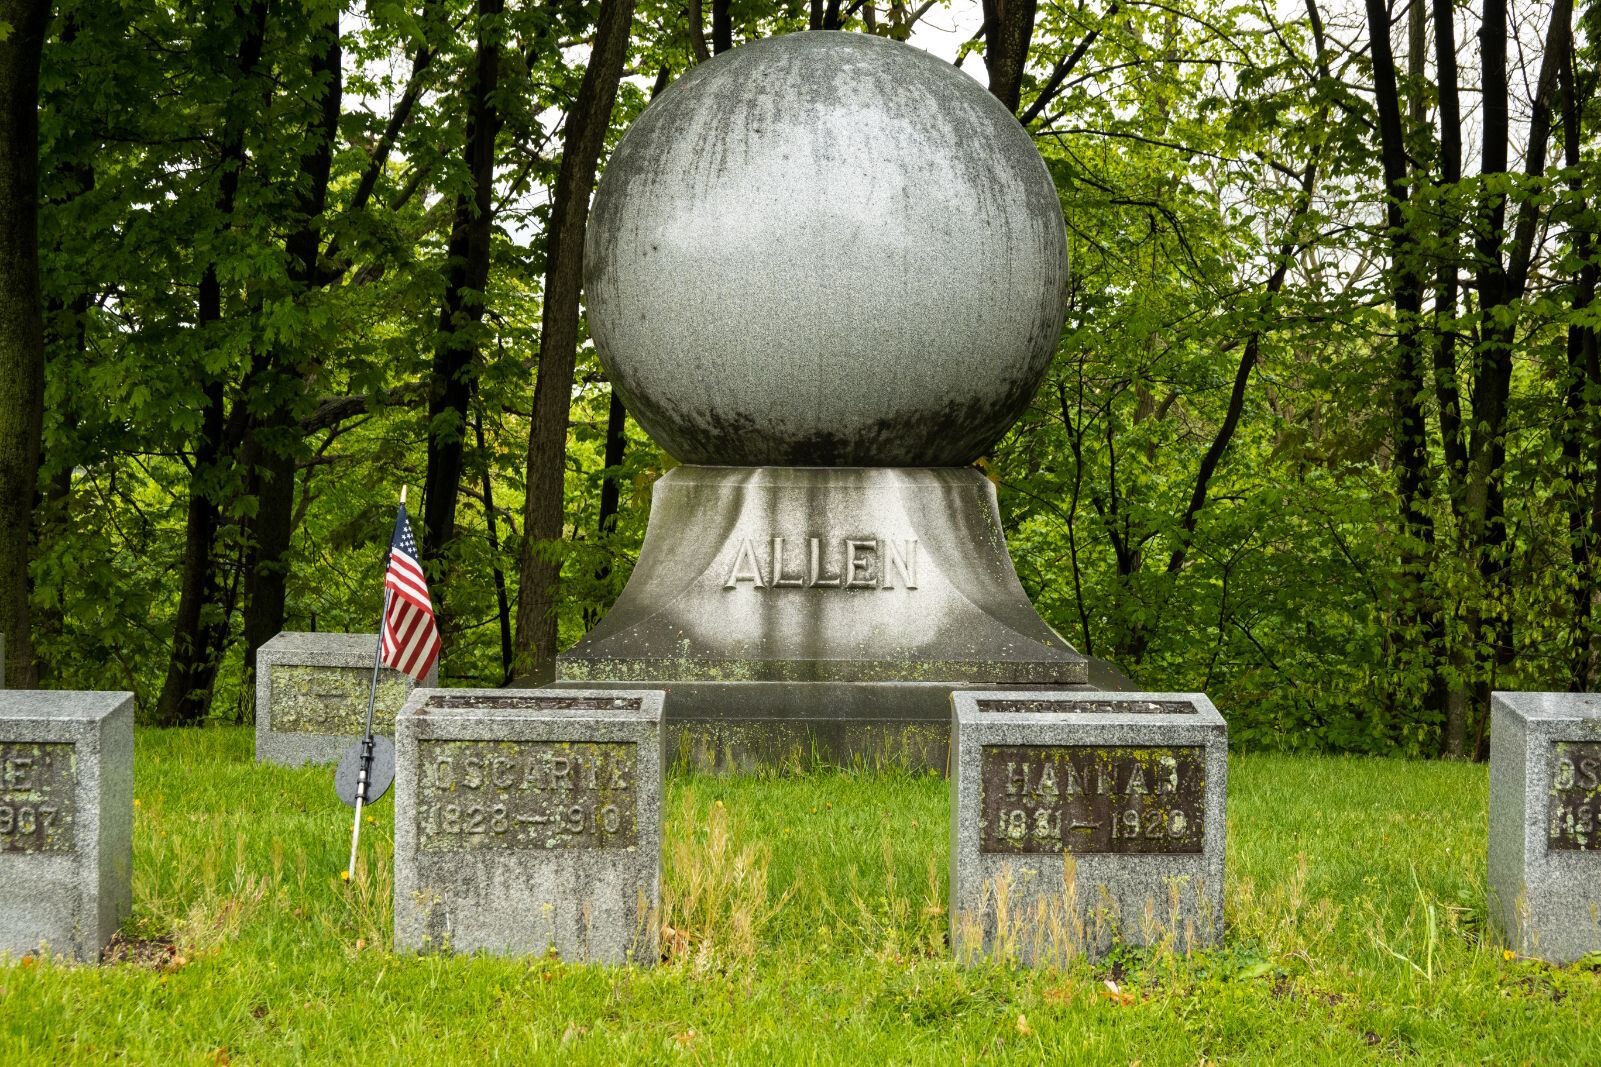 This boulder-sized orb marks the family burial plot of the Oscar Allen family. He was owner of the Globe Casket Manufacturing Co.